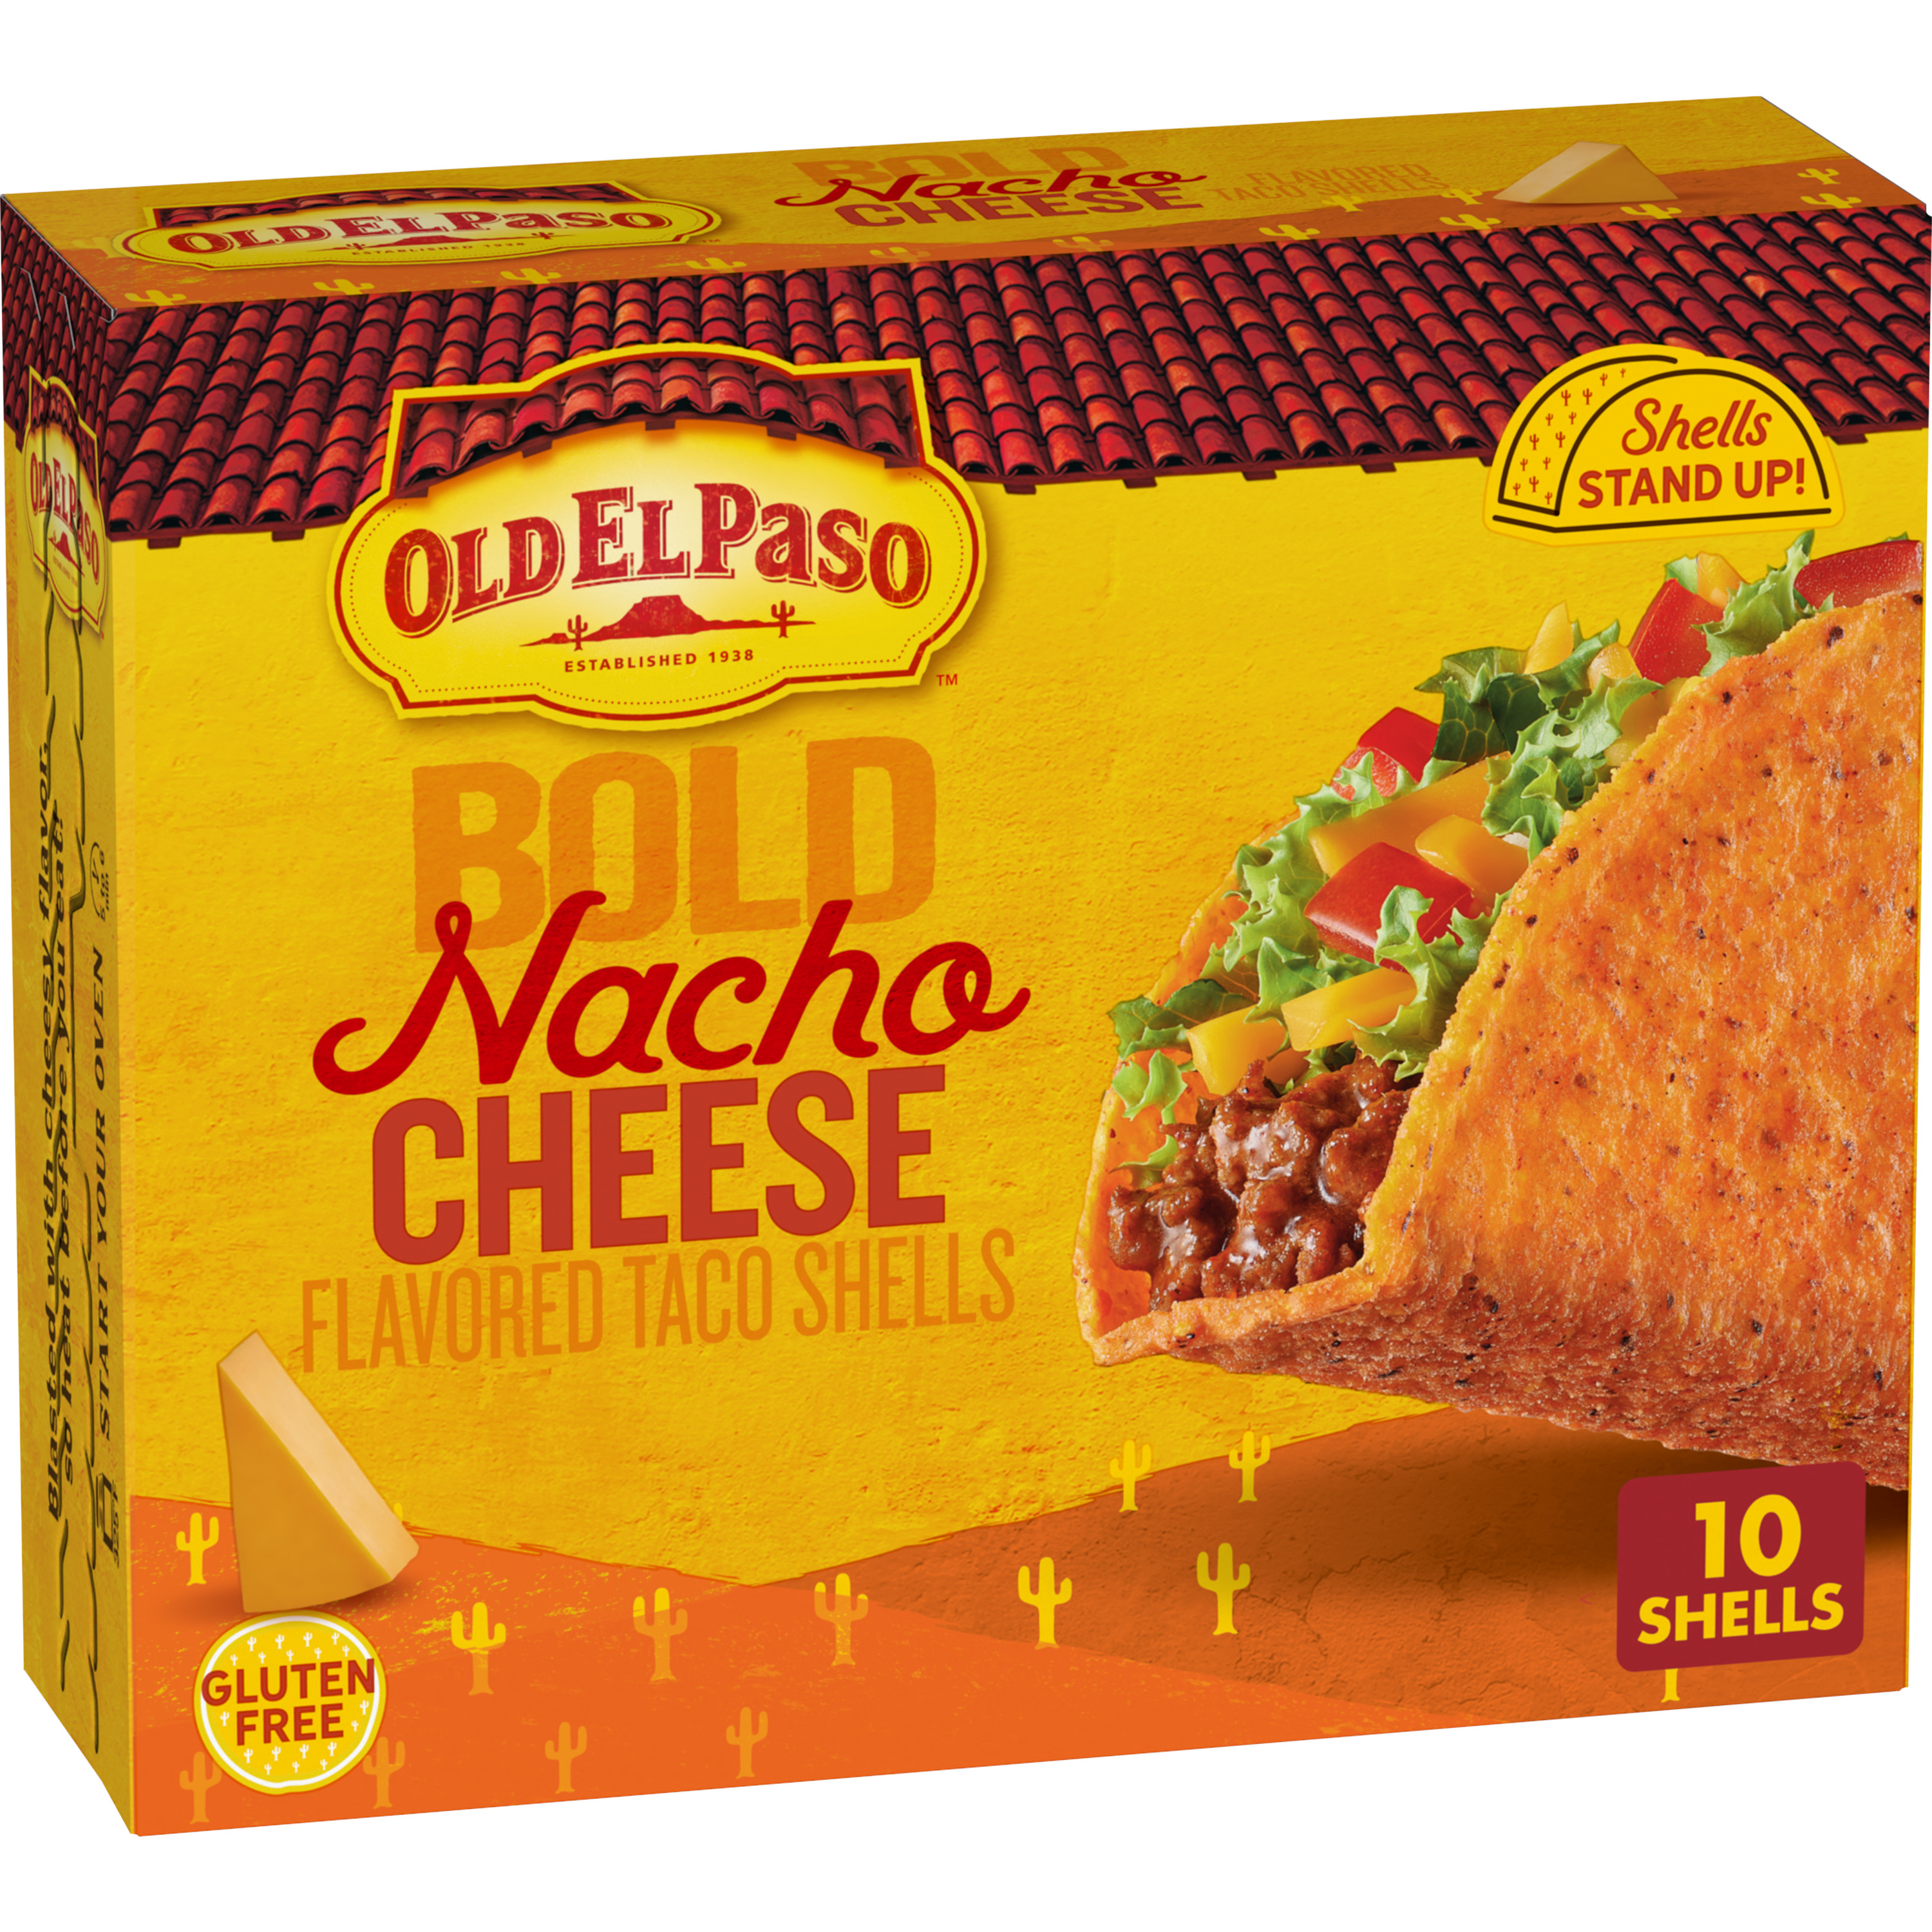 Old El Paso Stand 'N Stuff Bold Nacho Cheese Flavored Taco Shells, 10-Count - image 1 of 11